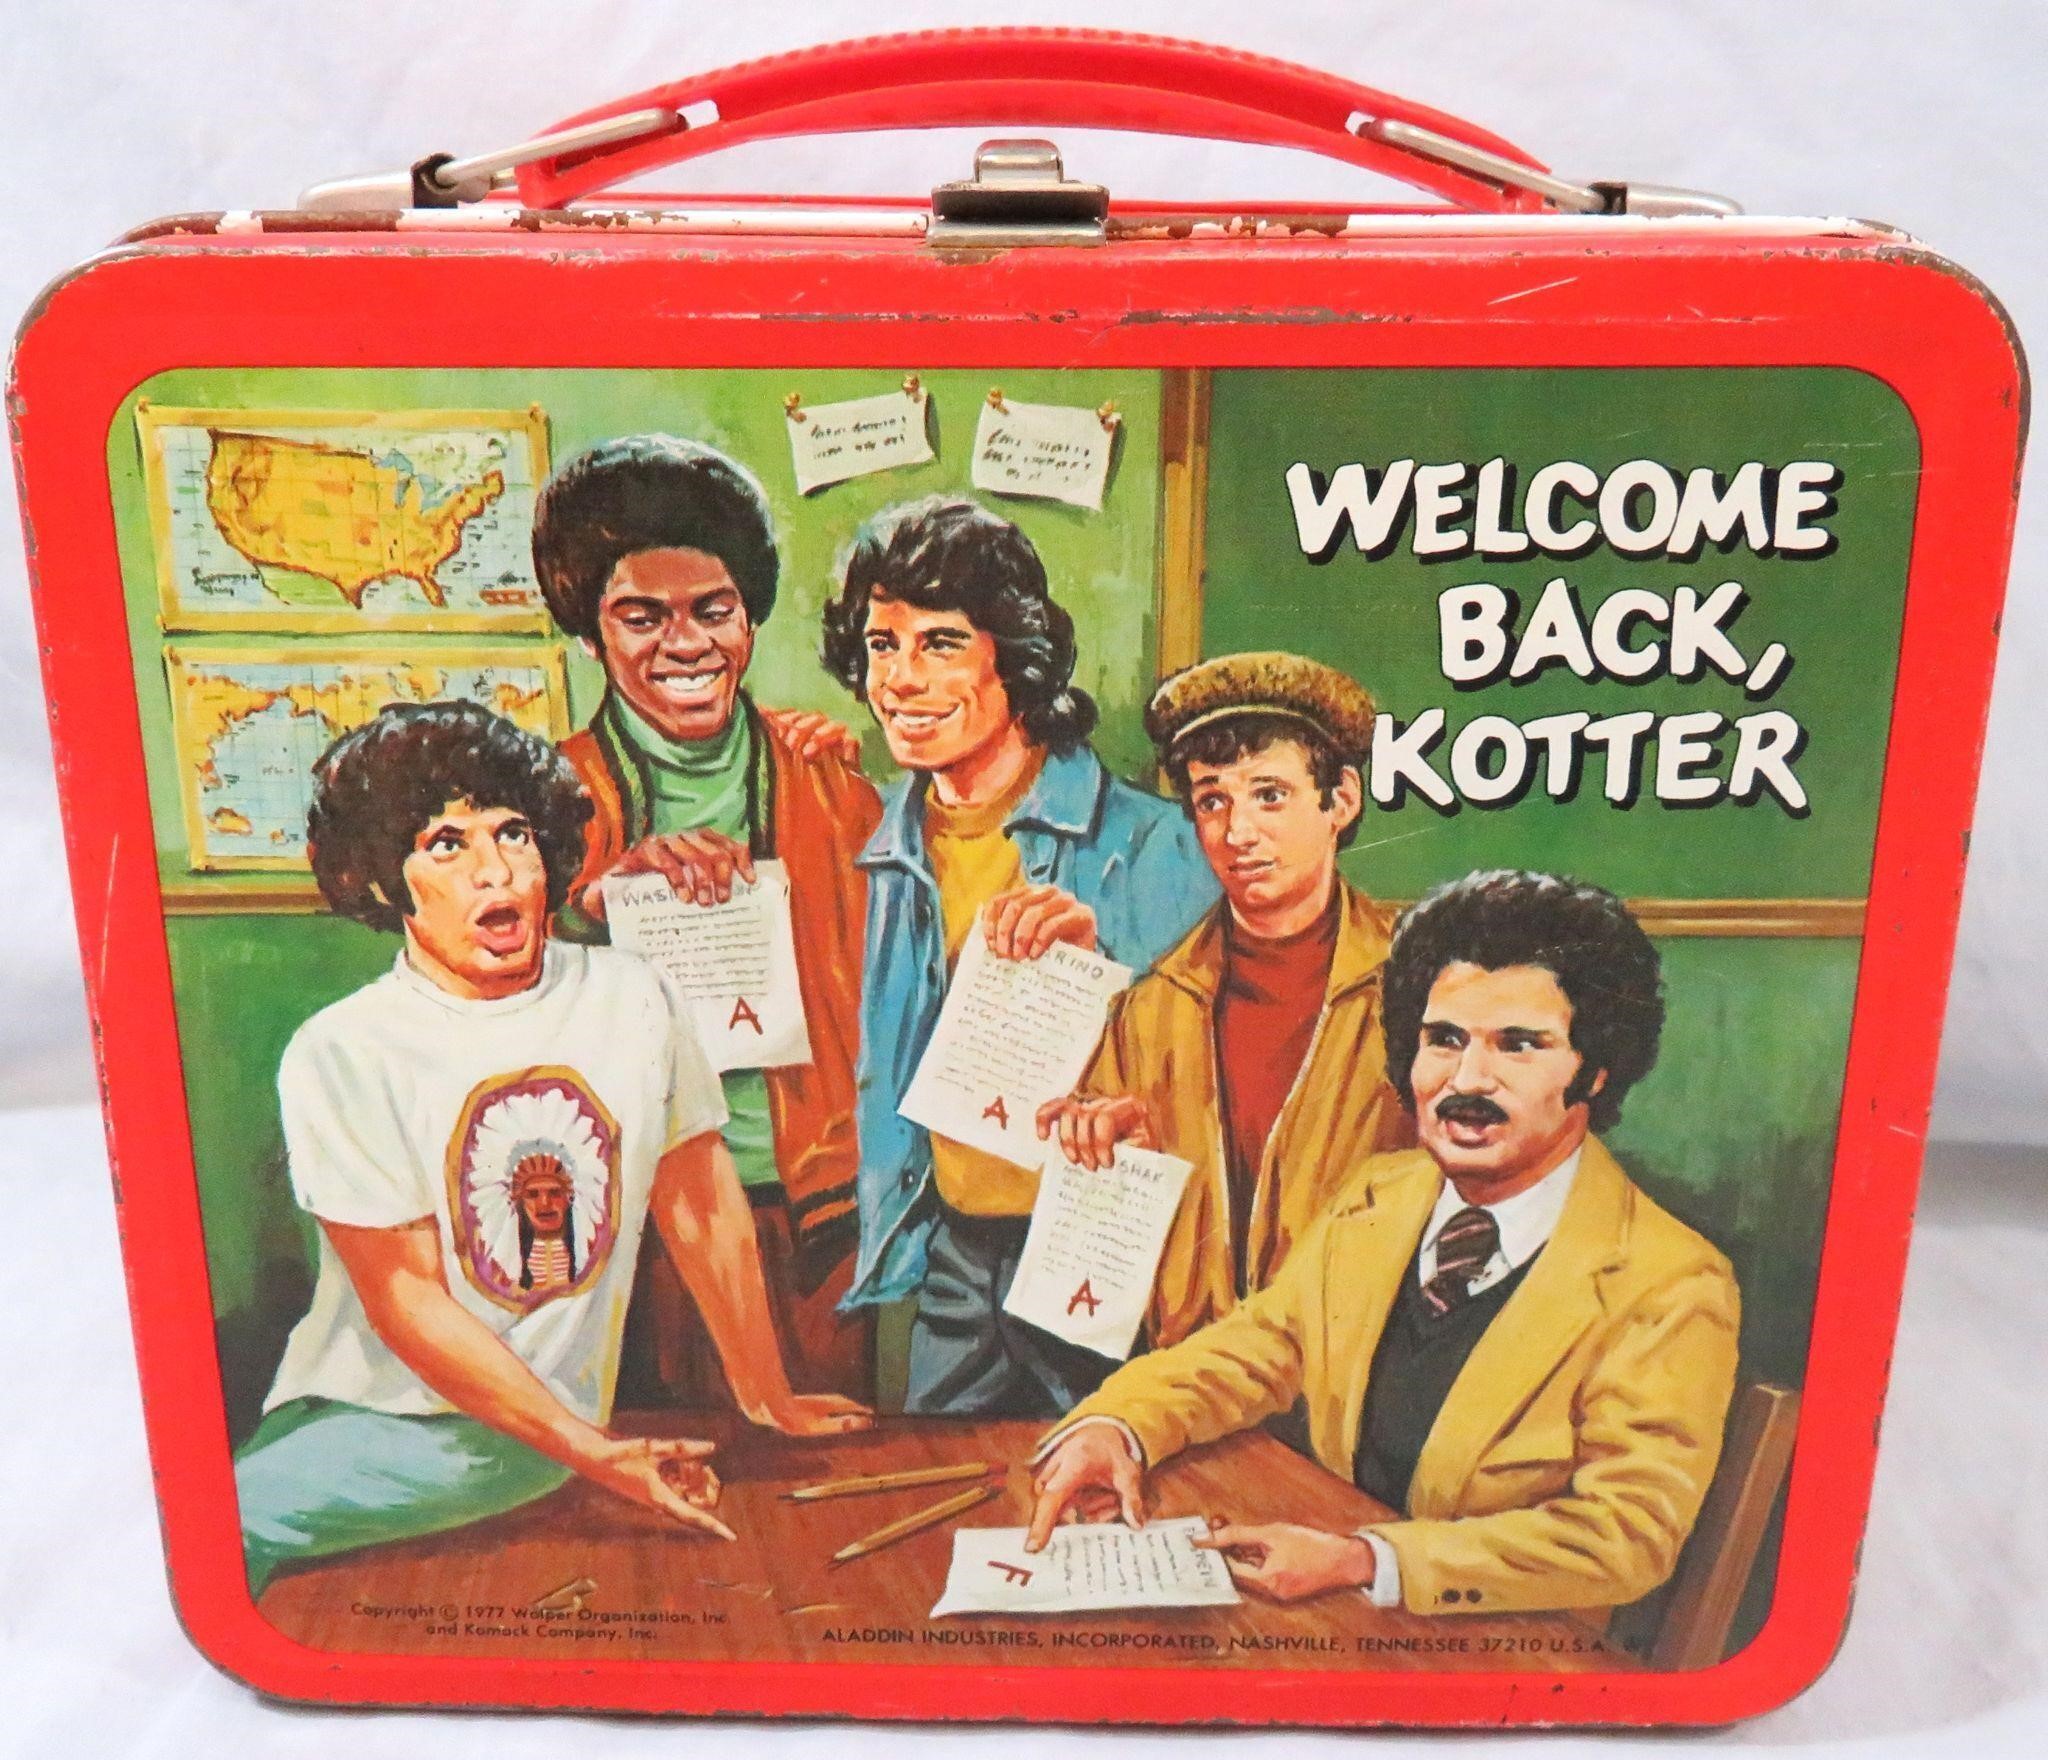 1977 TIN WELCOME BACK, KOTTER LUNCH BOX